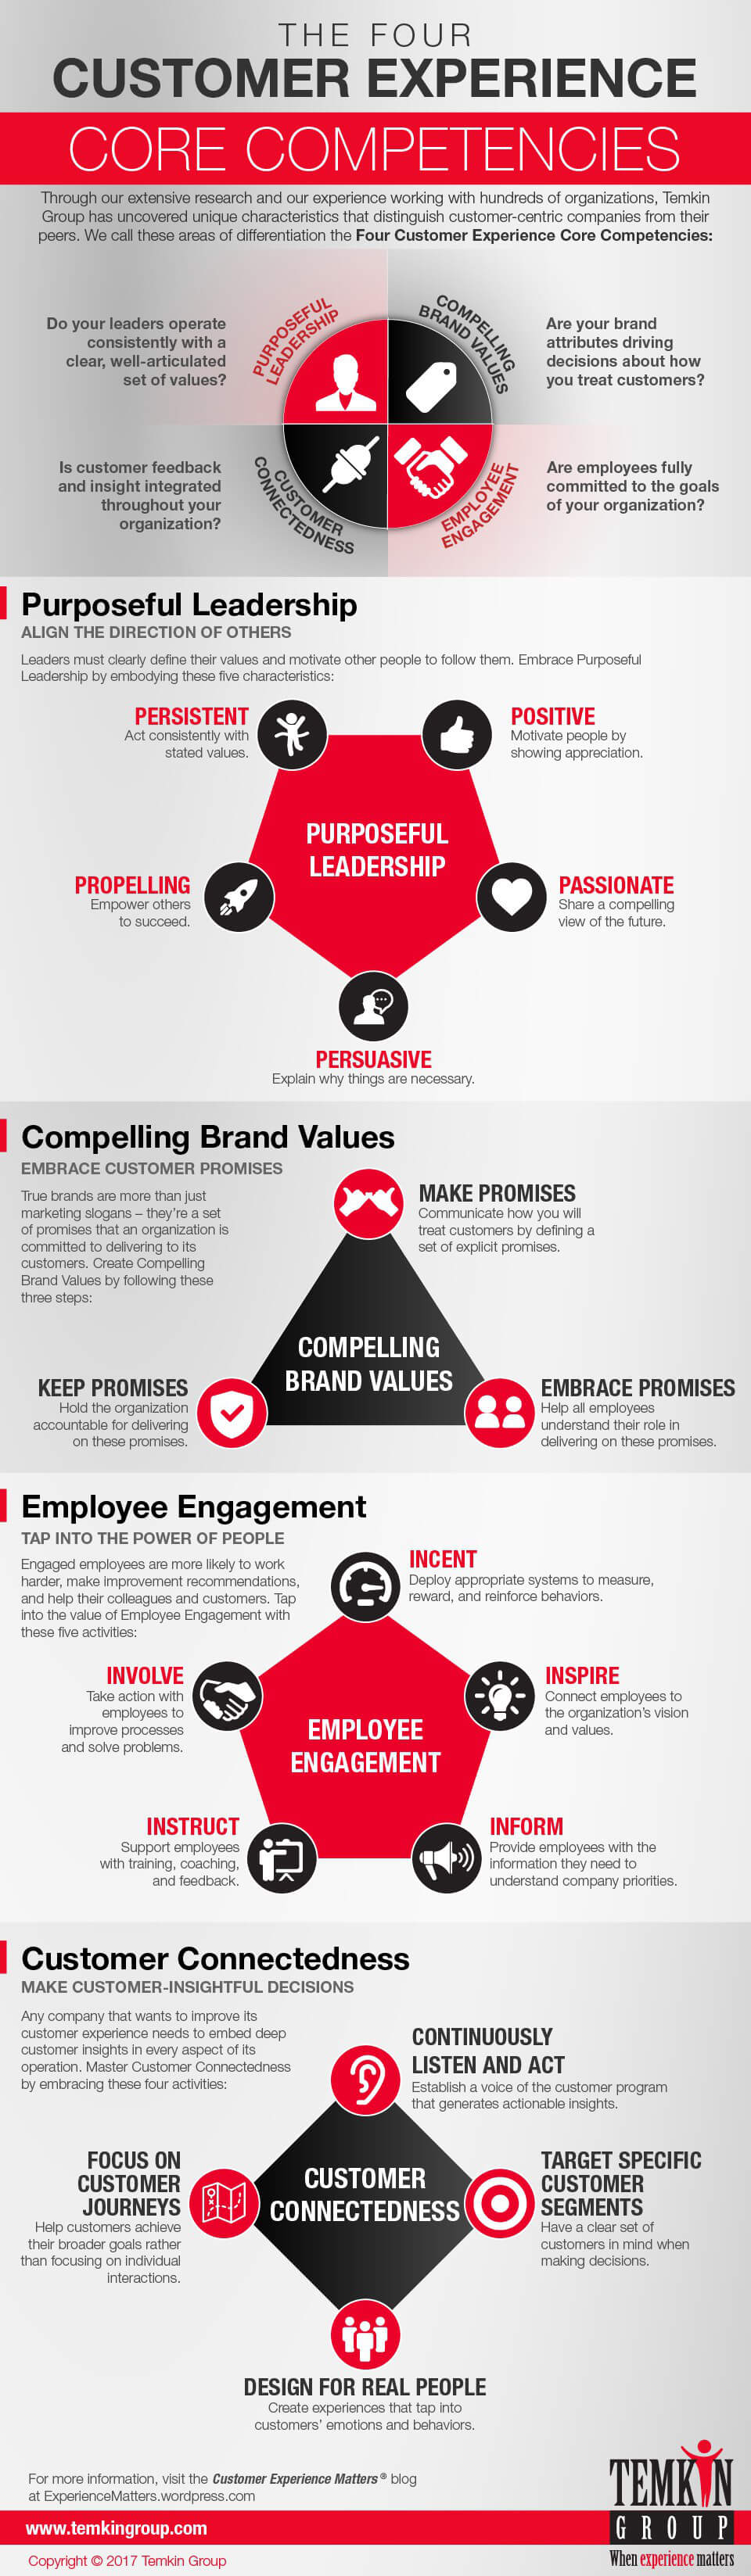 four-customer-experience-competencies-infographic